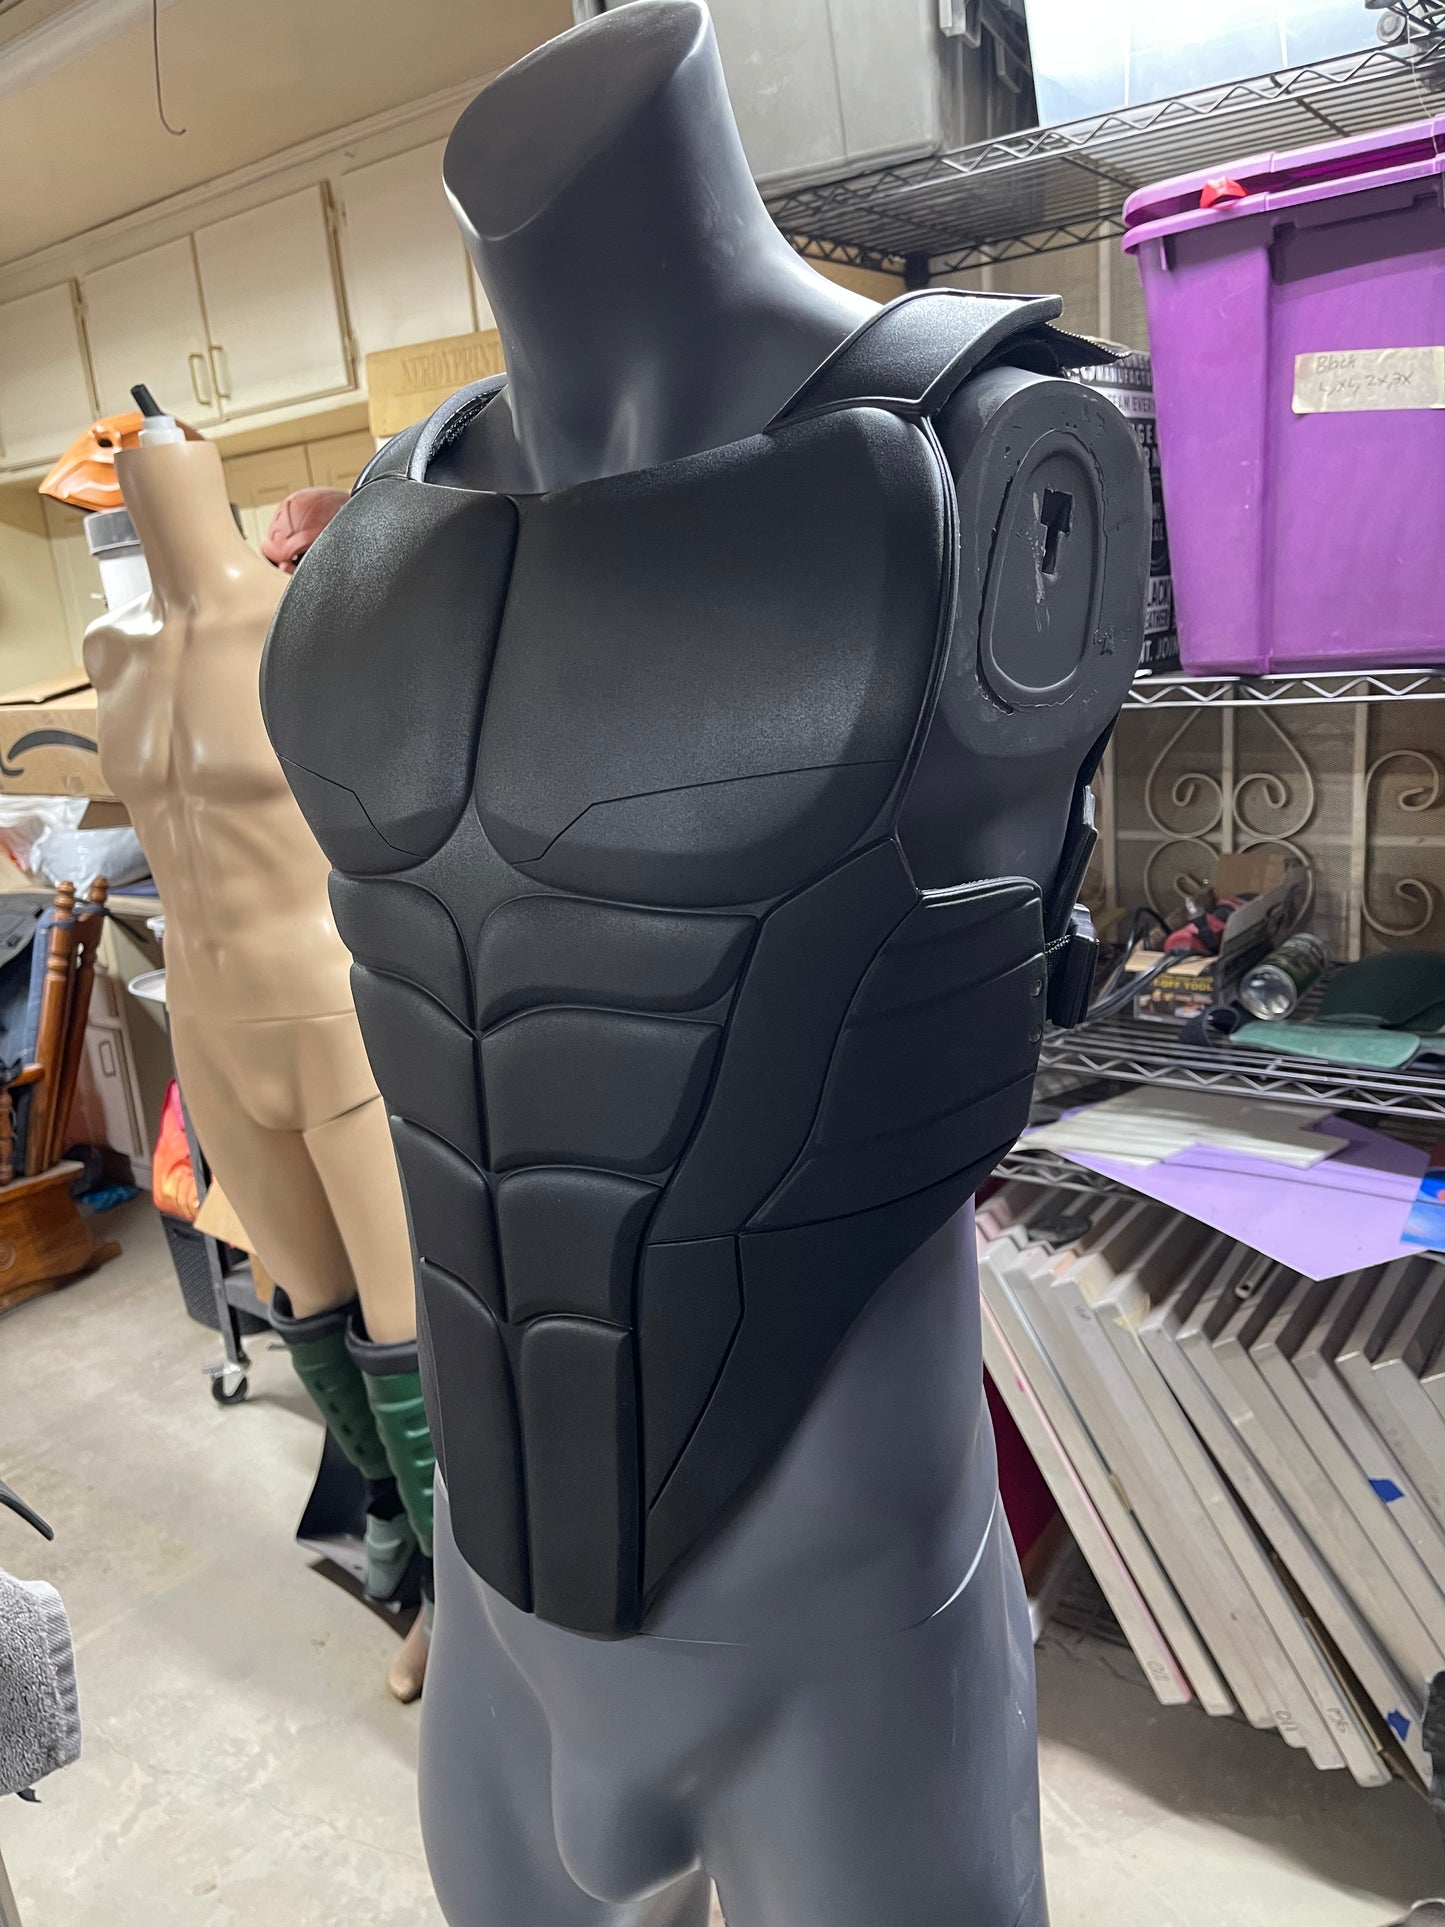 “The Champion” - Urethane Cosplay Armor Vest v1 - Free shipping to continental US